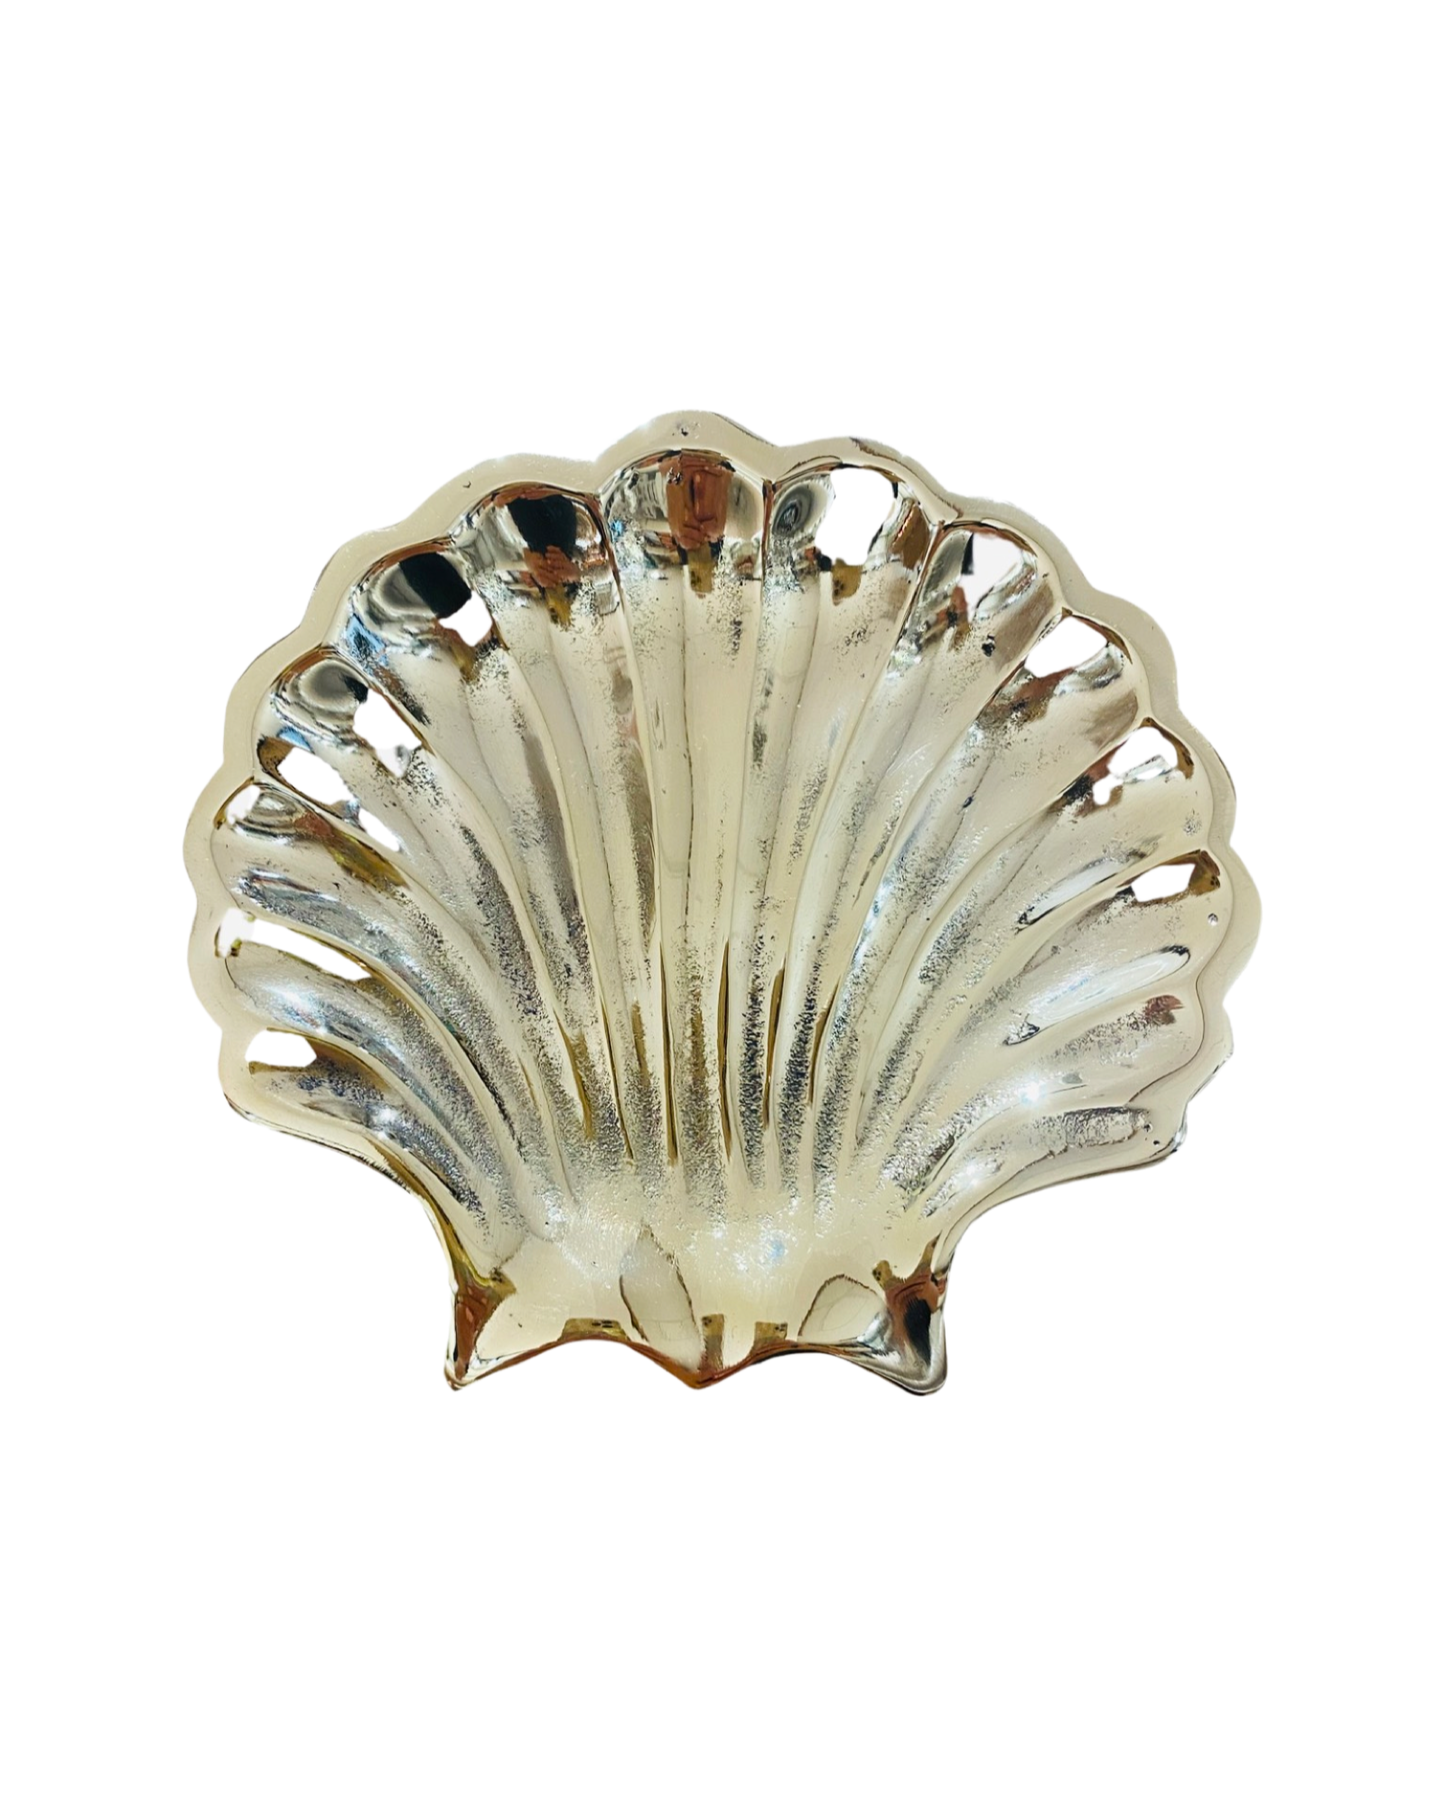 A clam shell style plate made of brass used to hold small objects